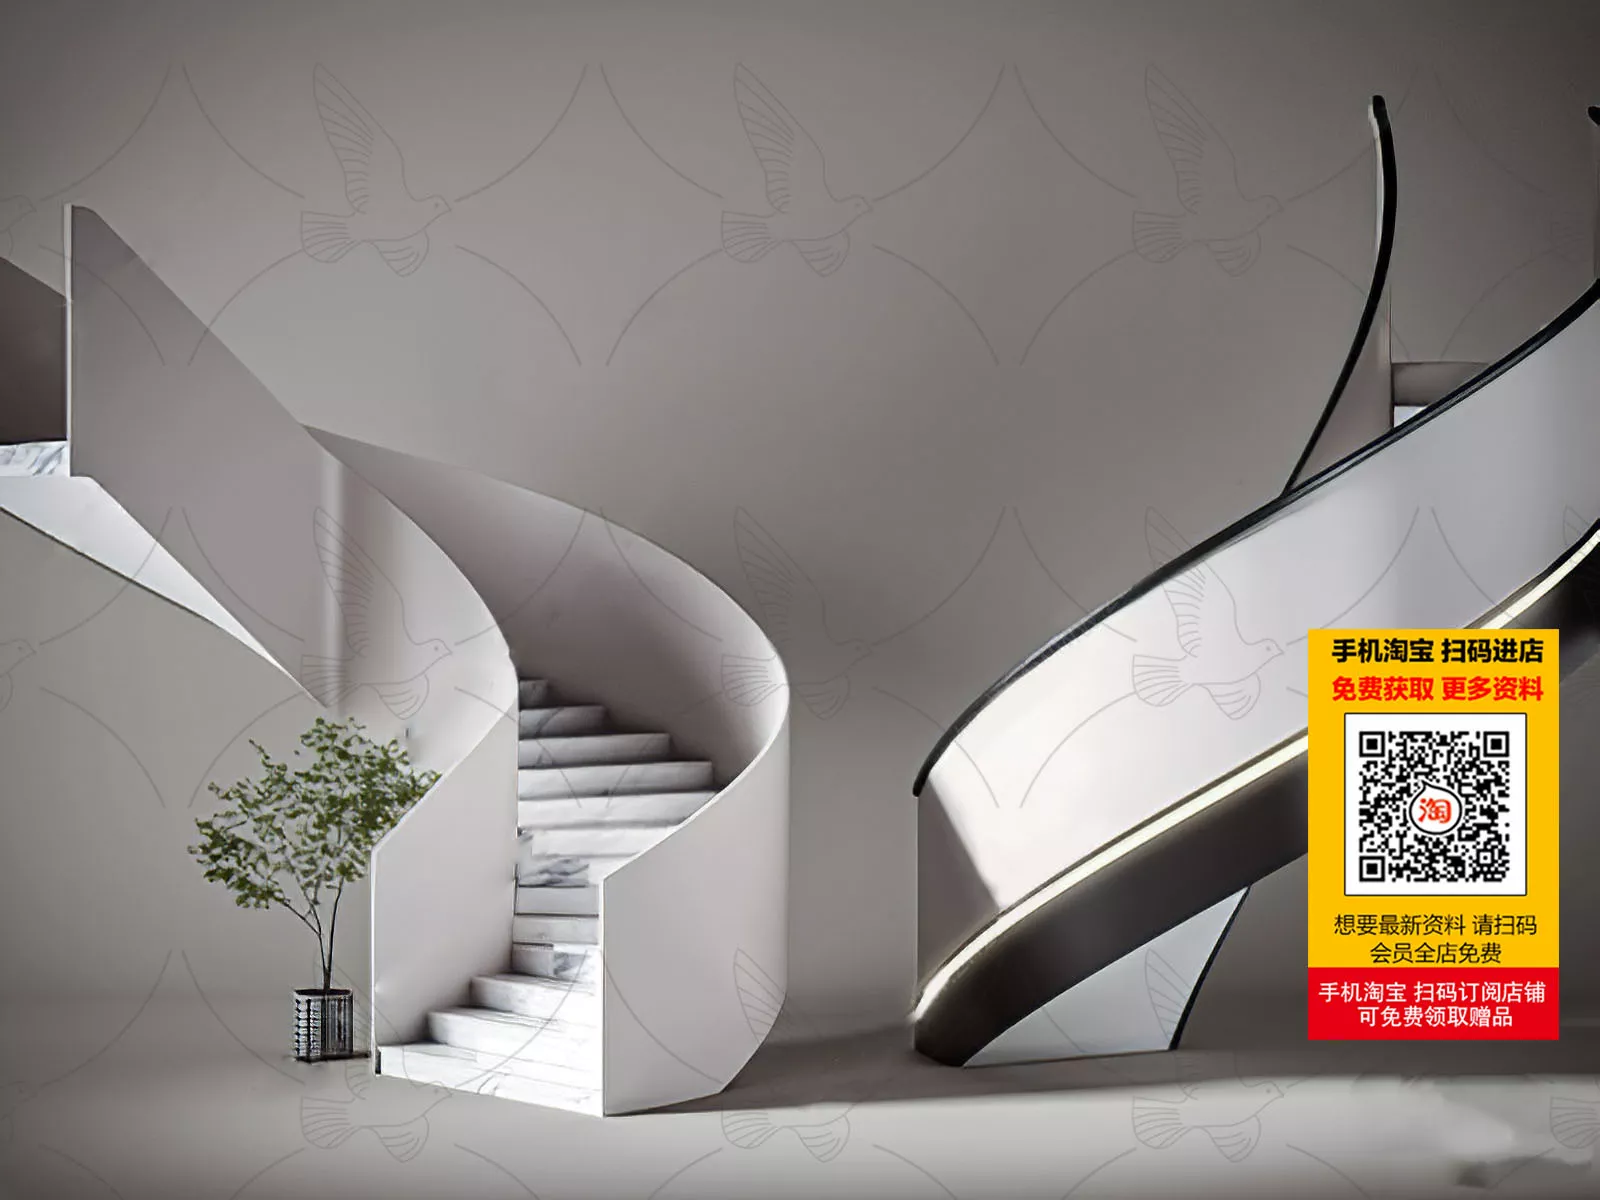 MODERN STAIRS - SKETCHUP 3D MODEL - VRAY OR ENSCAPE - ID14325